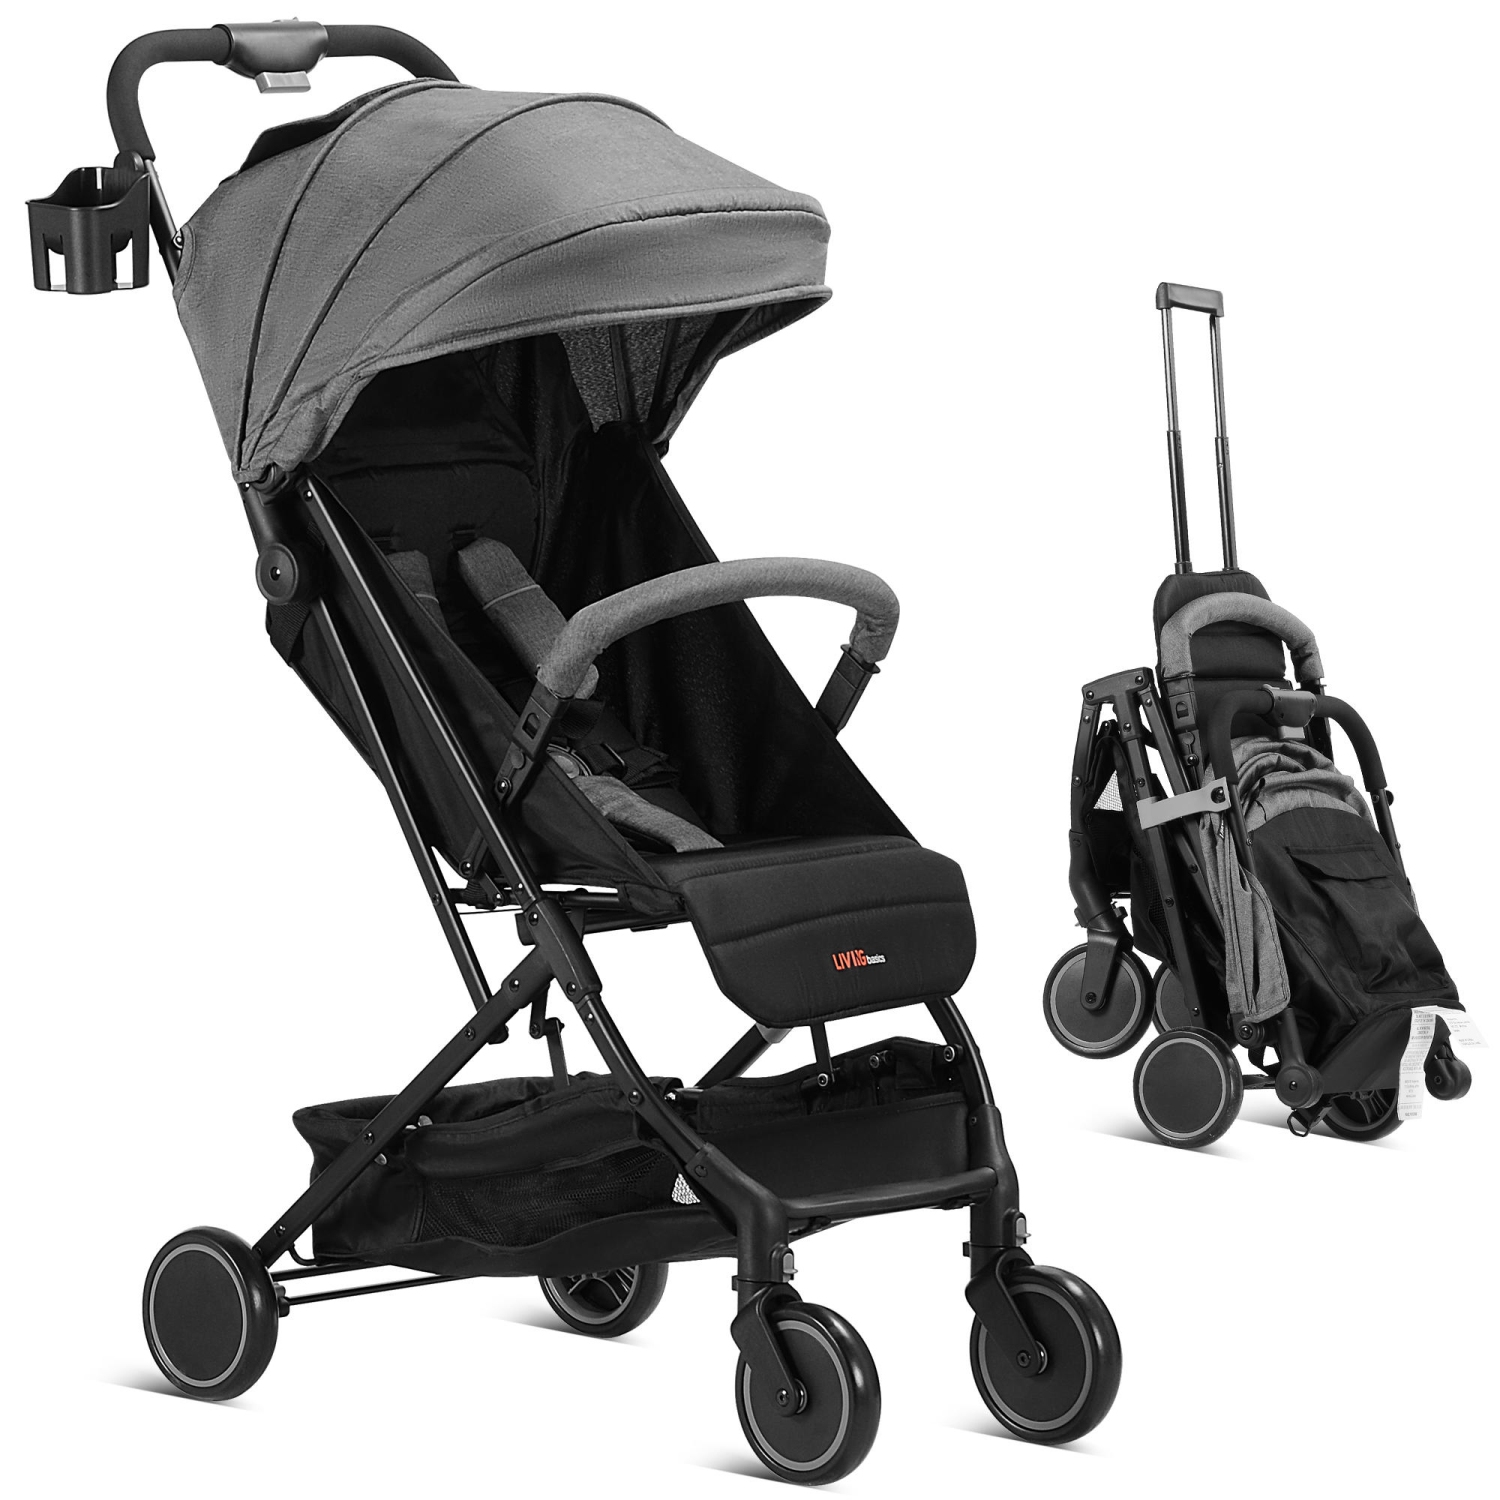 2 in 1 Convertible Baby Stroller, Compact Travel Stroller Foldable Baby Carriage with Storage Basket & Adjustable Canopy